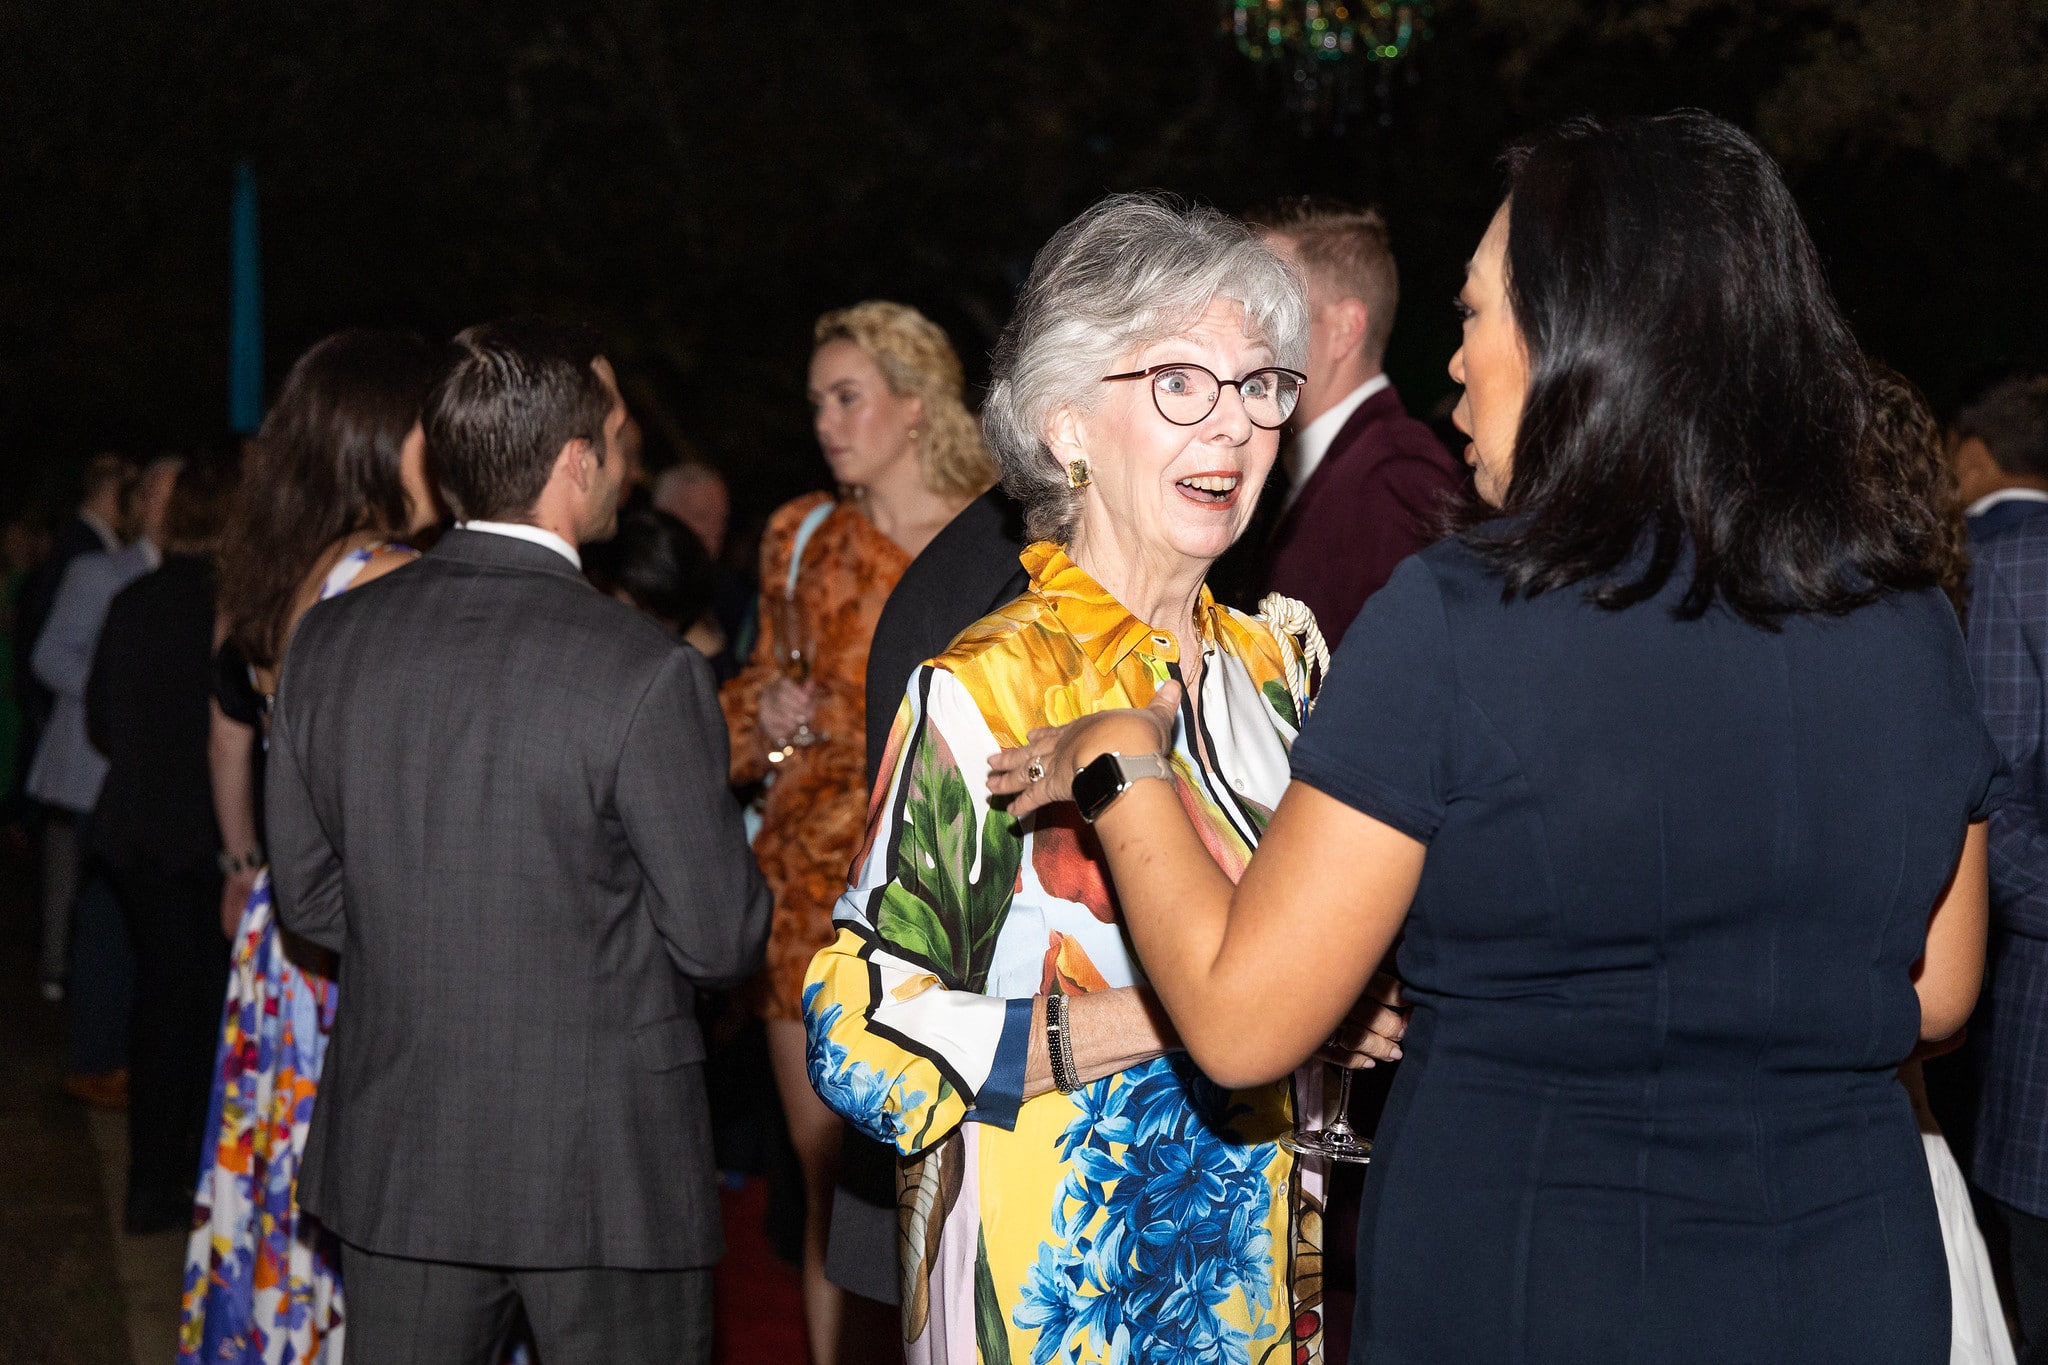 From L-R: Gayle Eury and Miya Shay  Gala on the Green® at Discovery Green in downtown Houston. February 23, 2023. Photo: Lawrence Elizabeth Knox